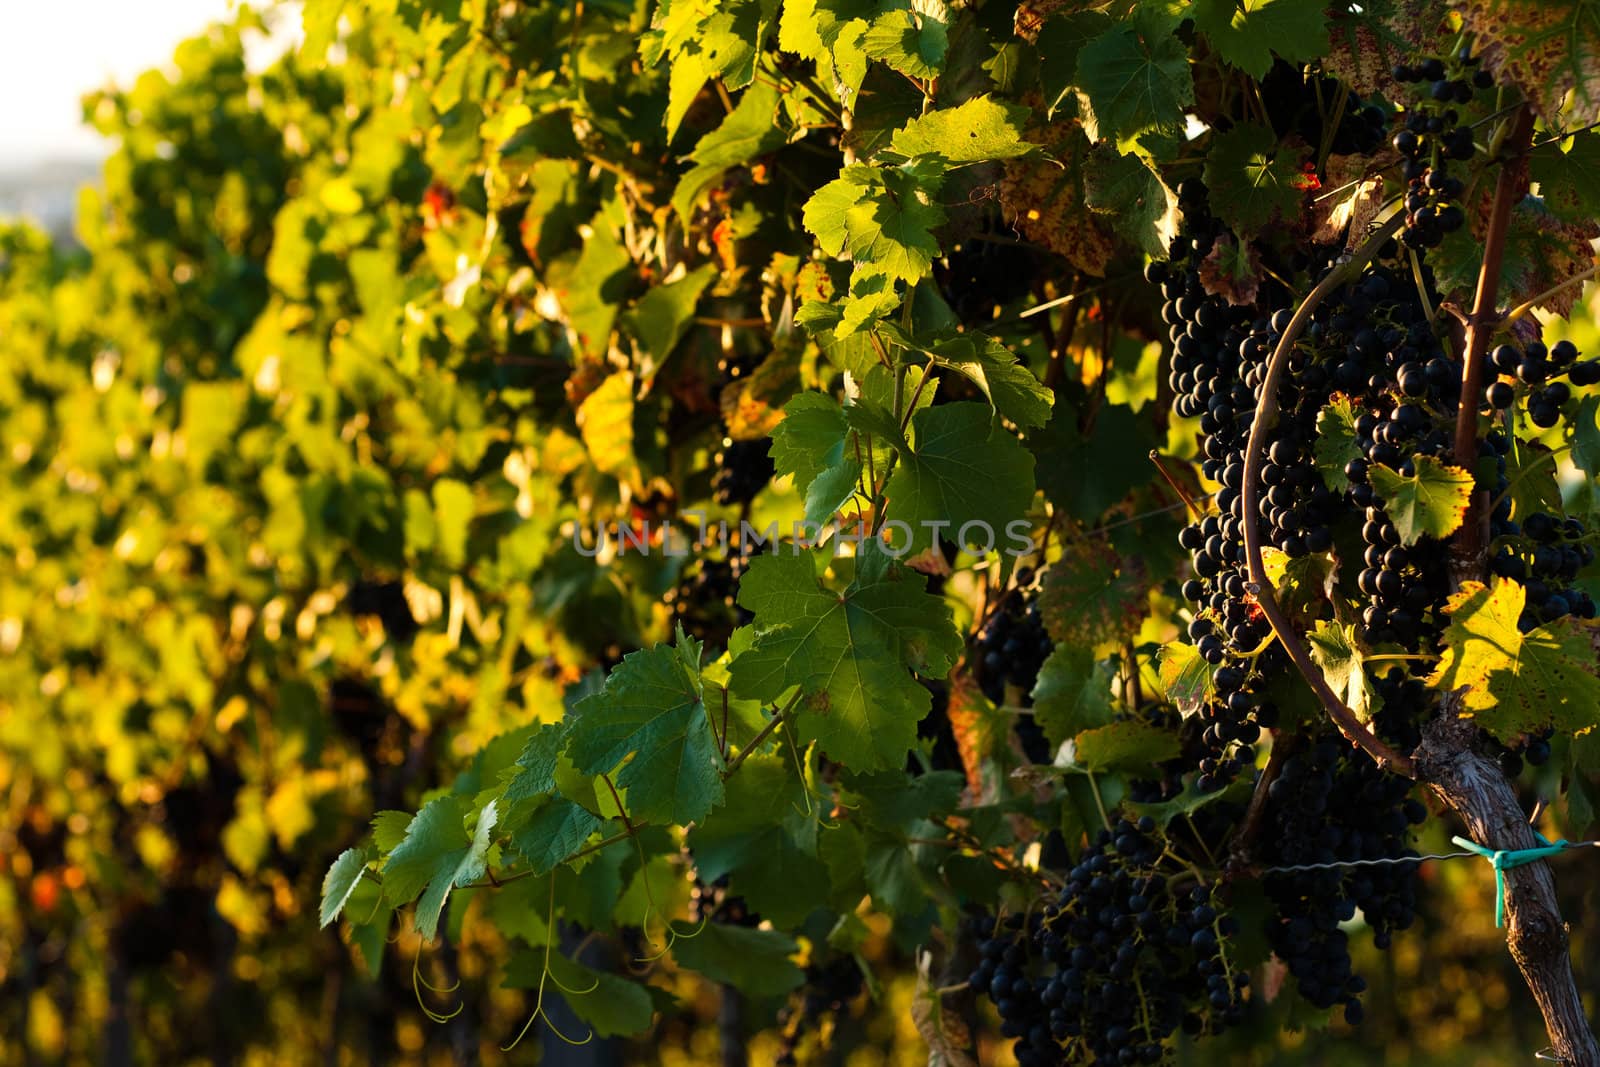 Red grapes on the vine in a sunny vineyard